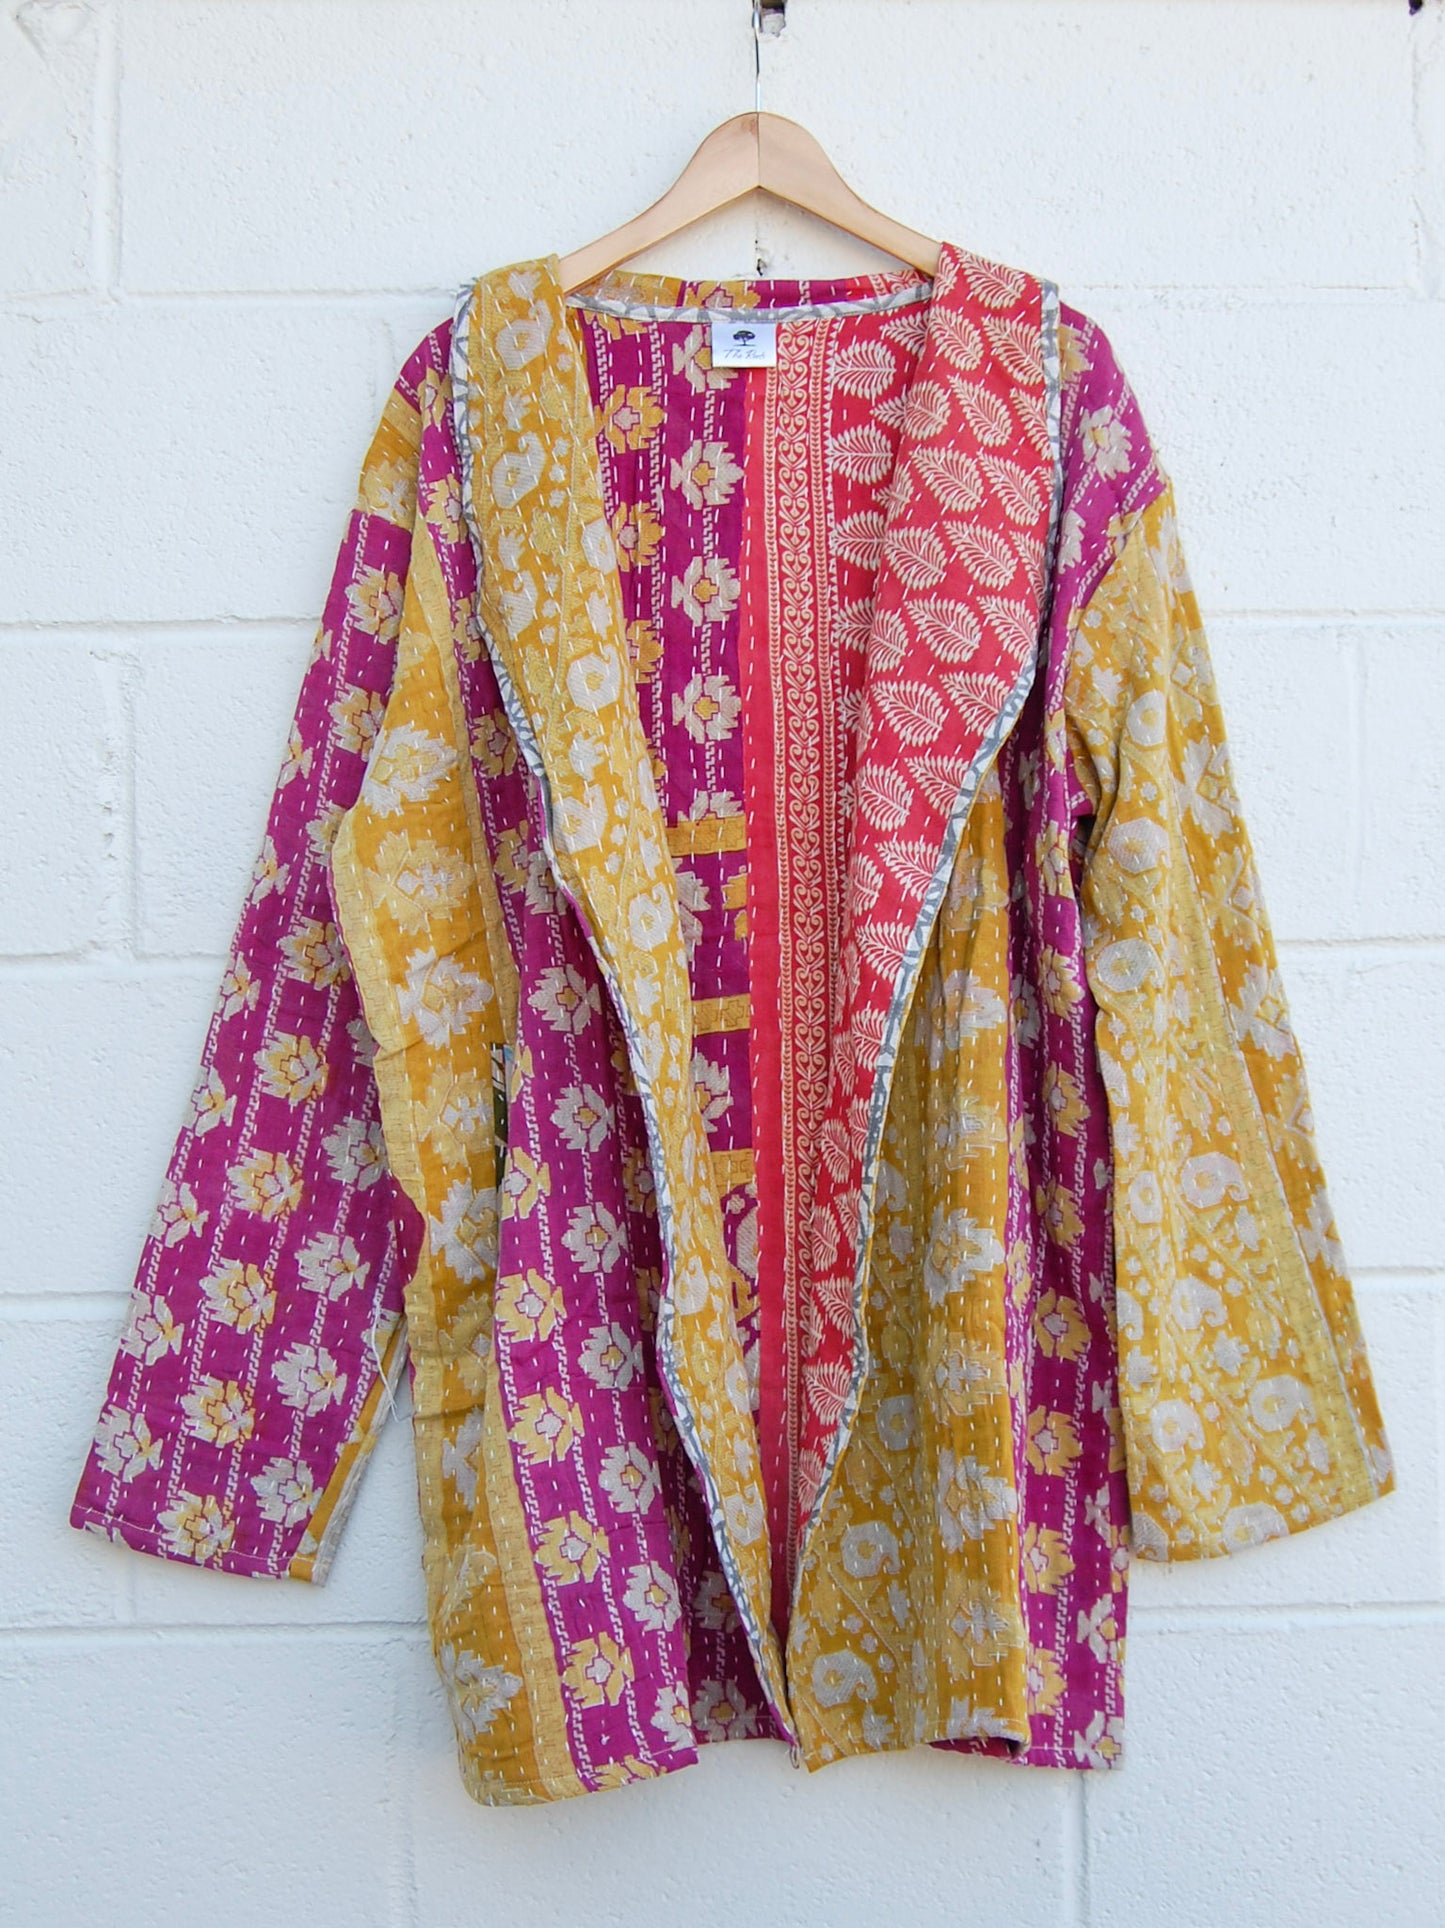 The Dahlia Patchwork Jacket in Apricot - SpiritedBoutiques Boho Hippie Boutique Style Jacket, The Roots